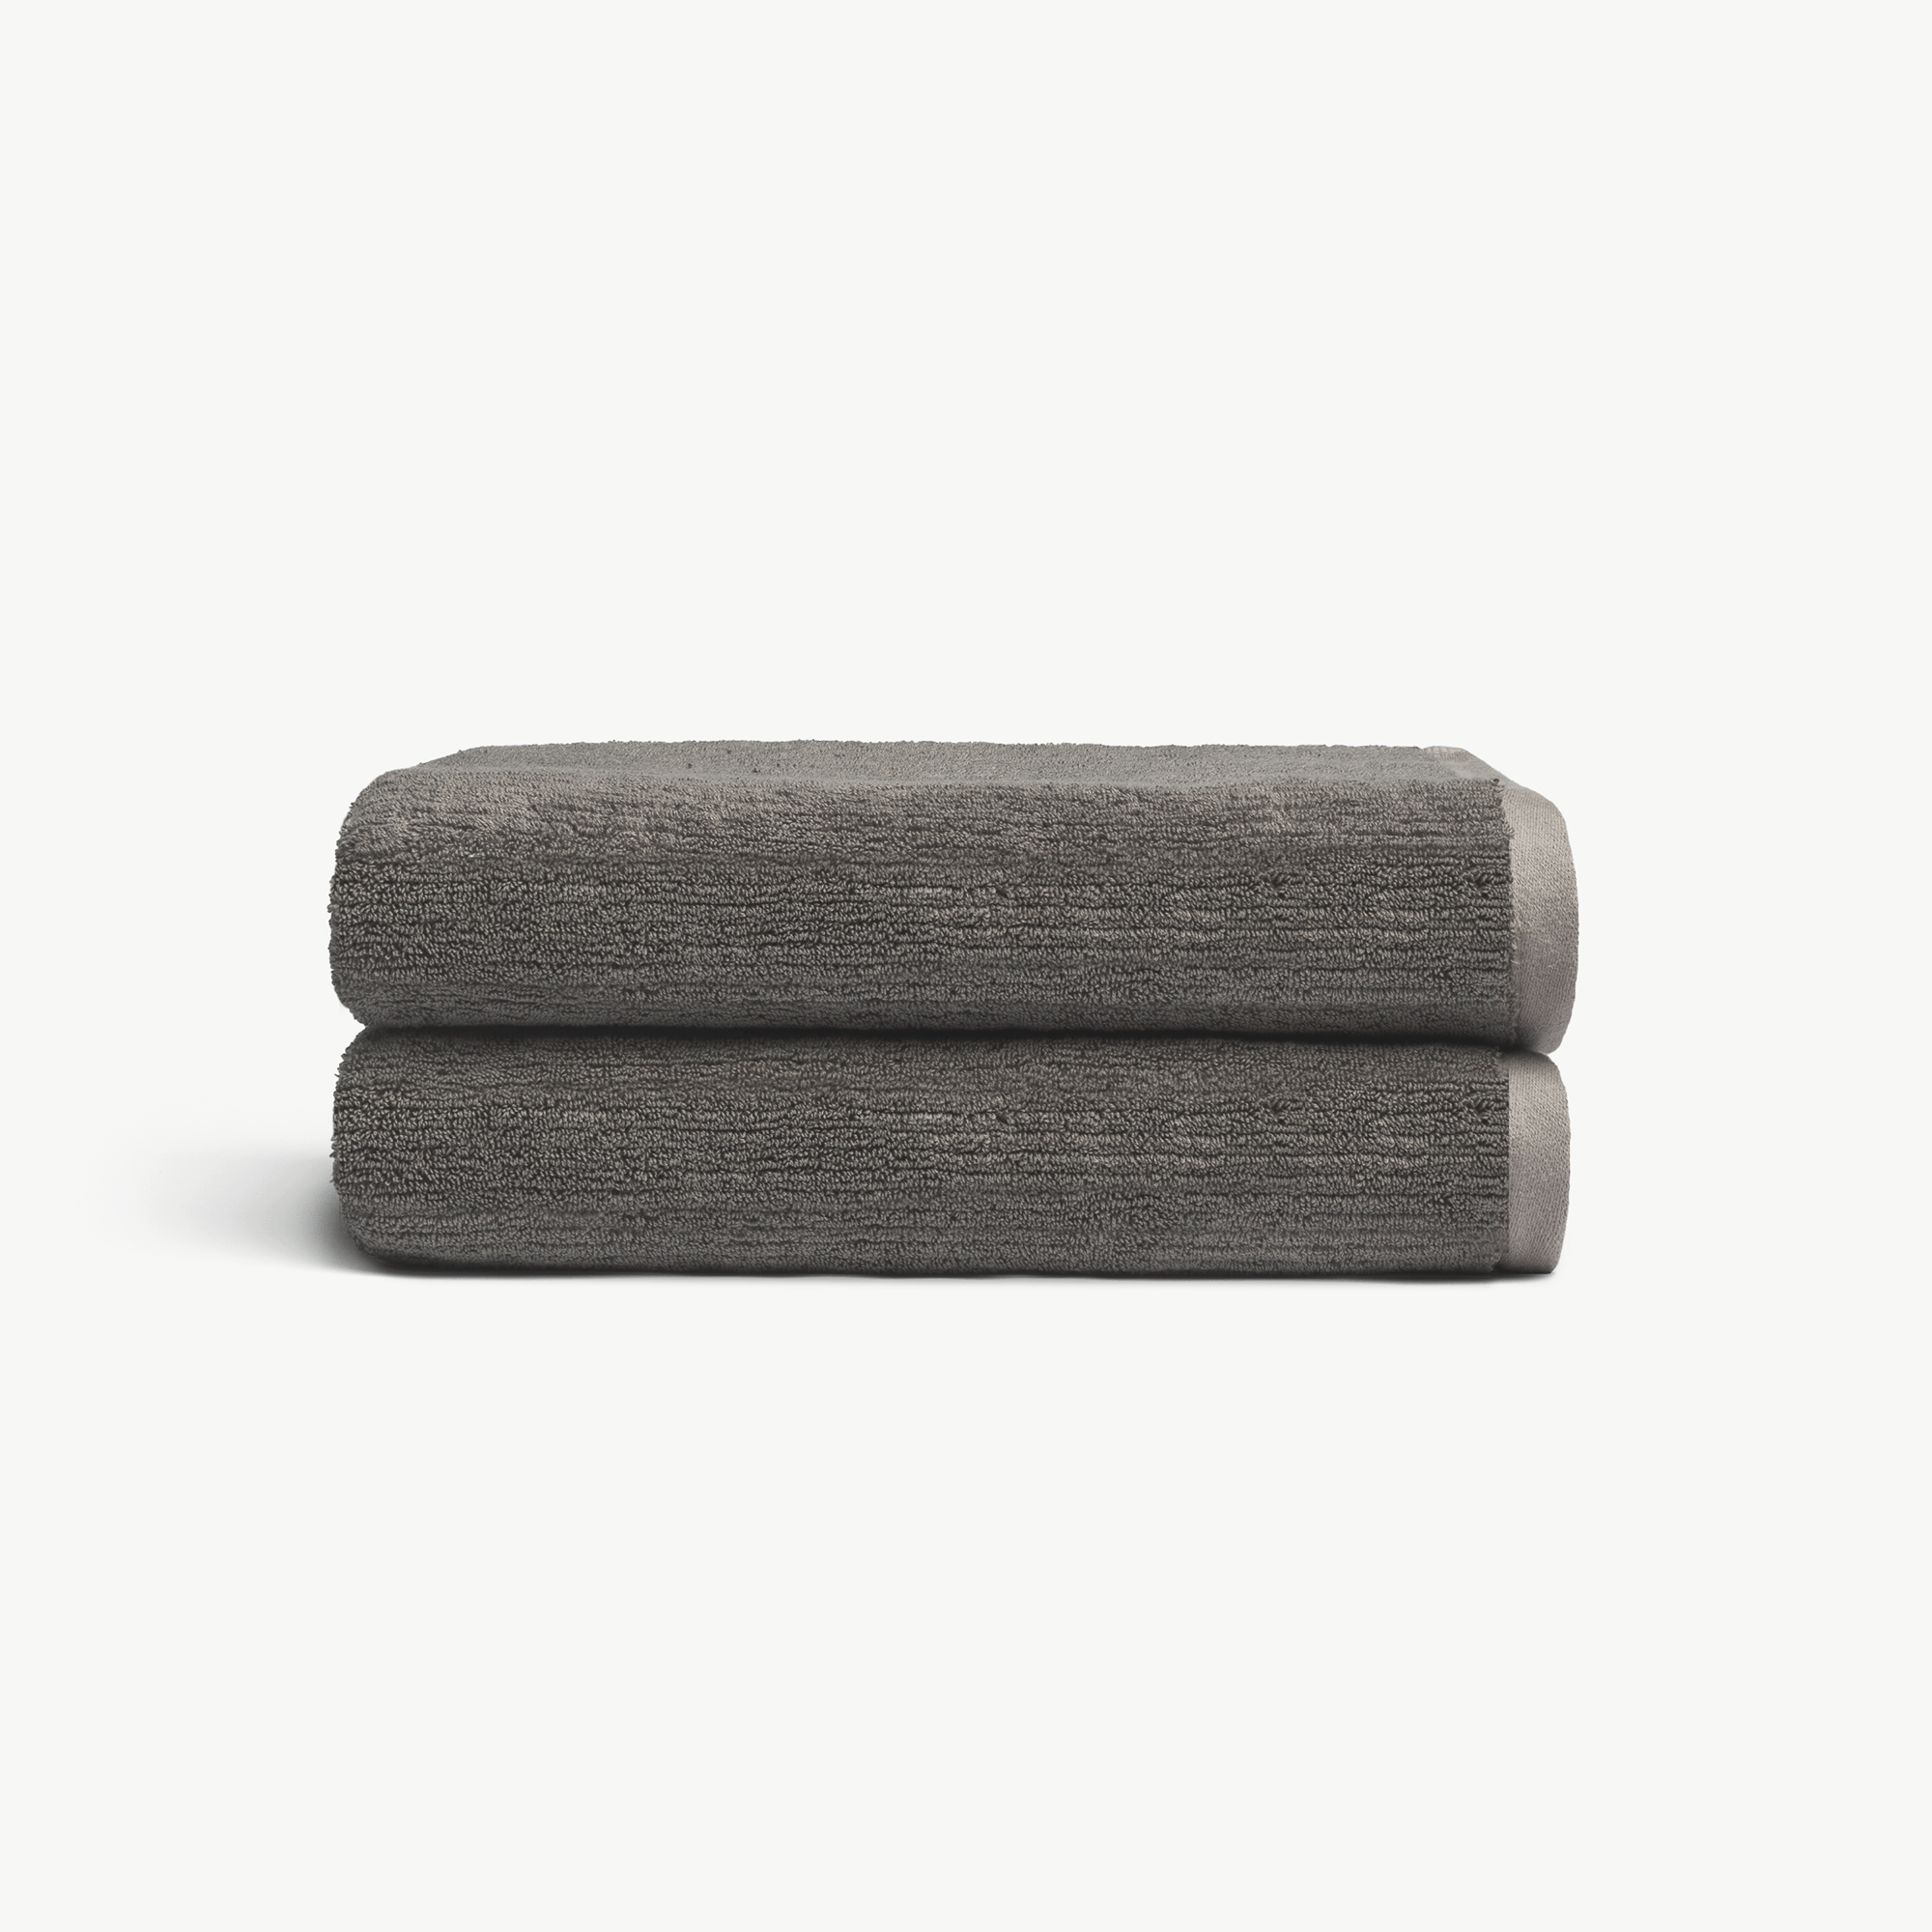 Ribbed Terry Bath Towels in the color Charcoal. Photo of Charcoal Waffle Bath Towels taken with white background. |Color:Charcoal